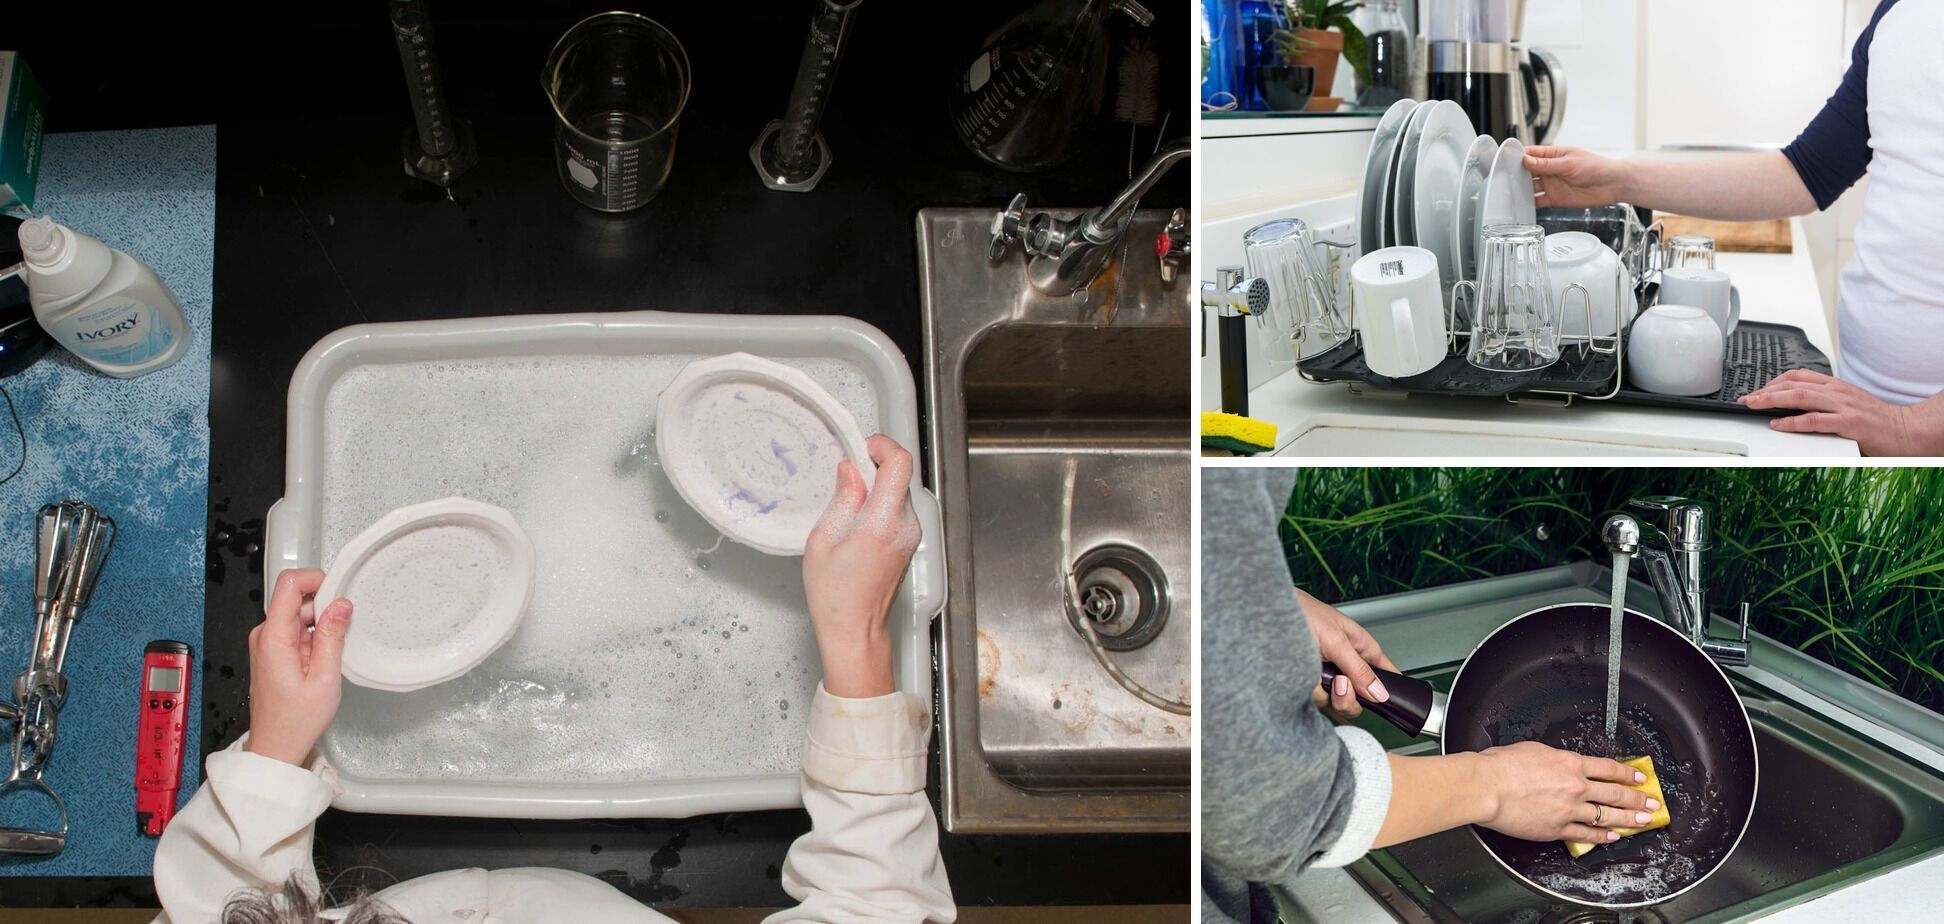 How to wash dishes without detergent